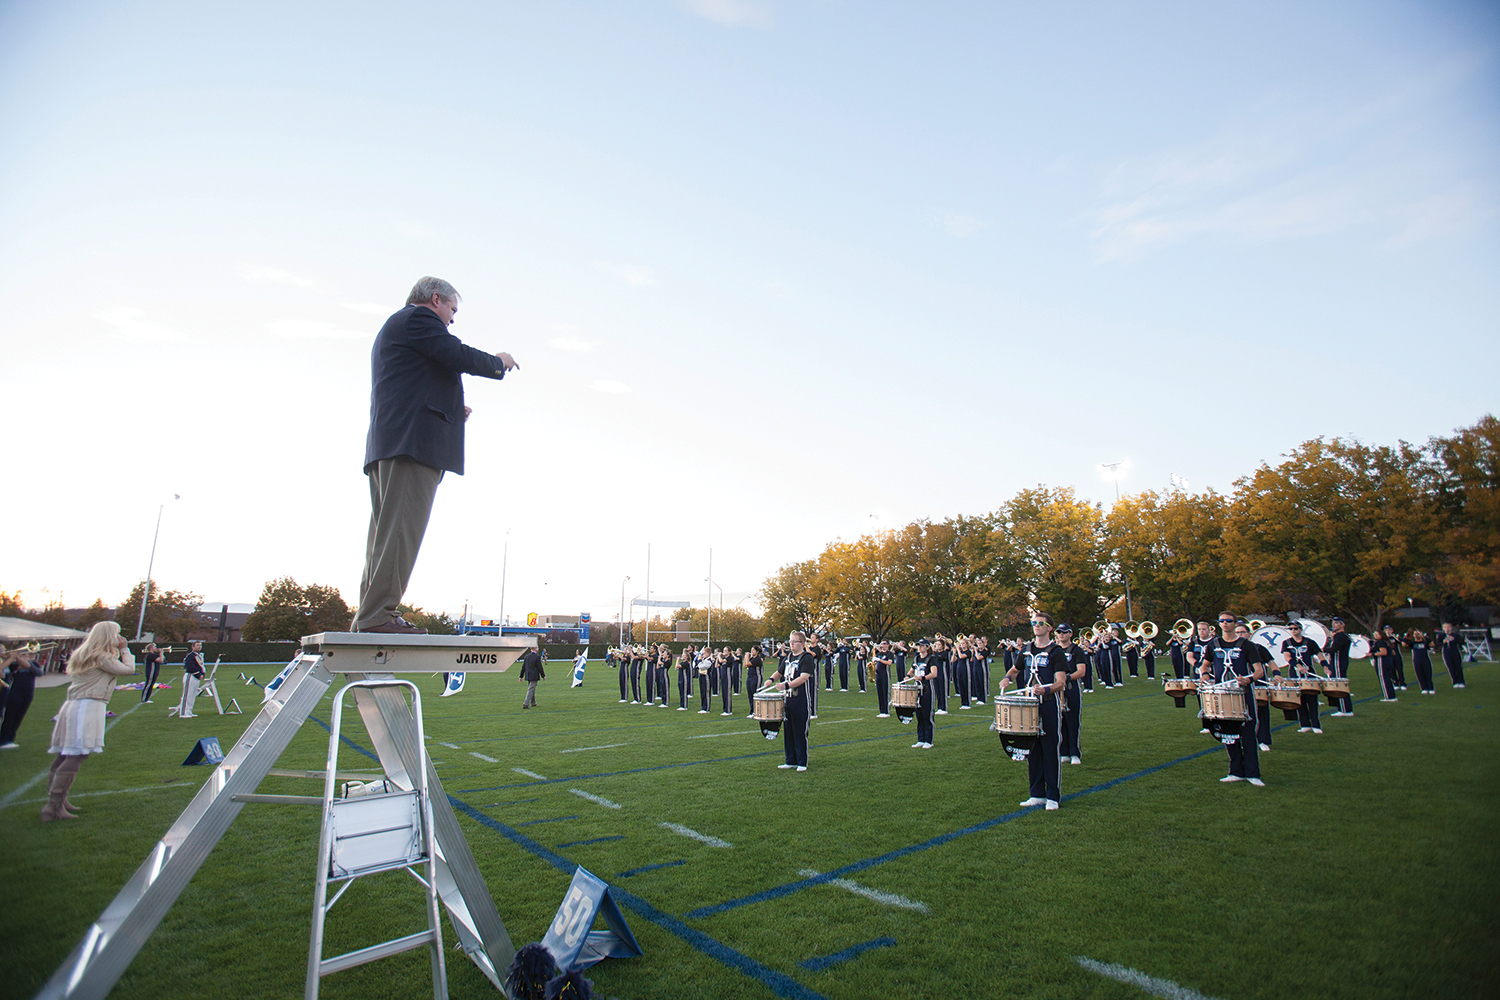 The BYU Marching Band prepares before the kickoff of a football game.